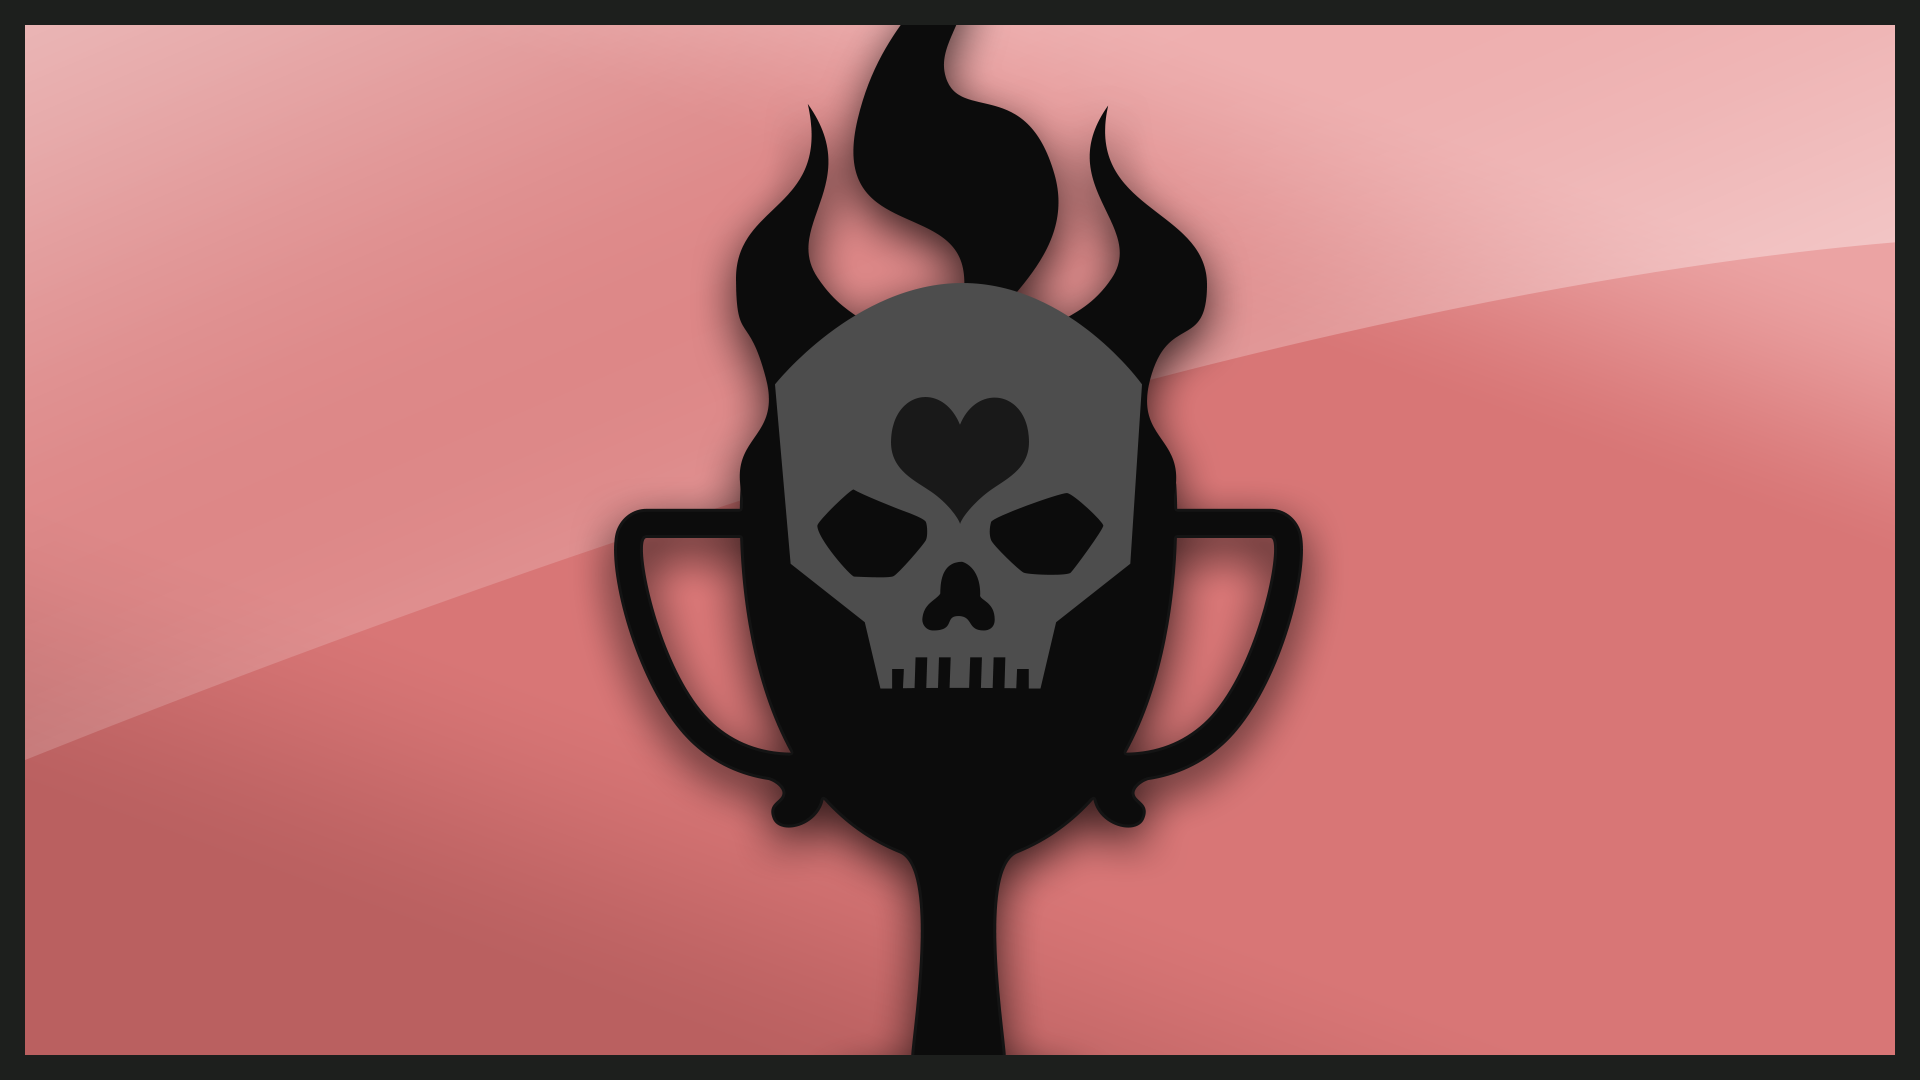 Icon for Love or Hate?